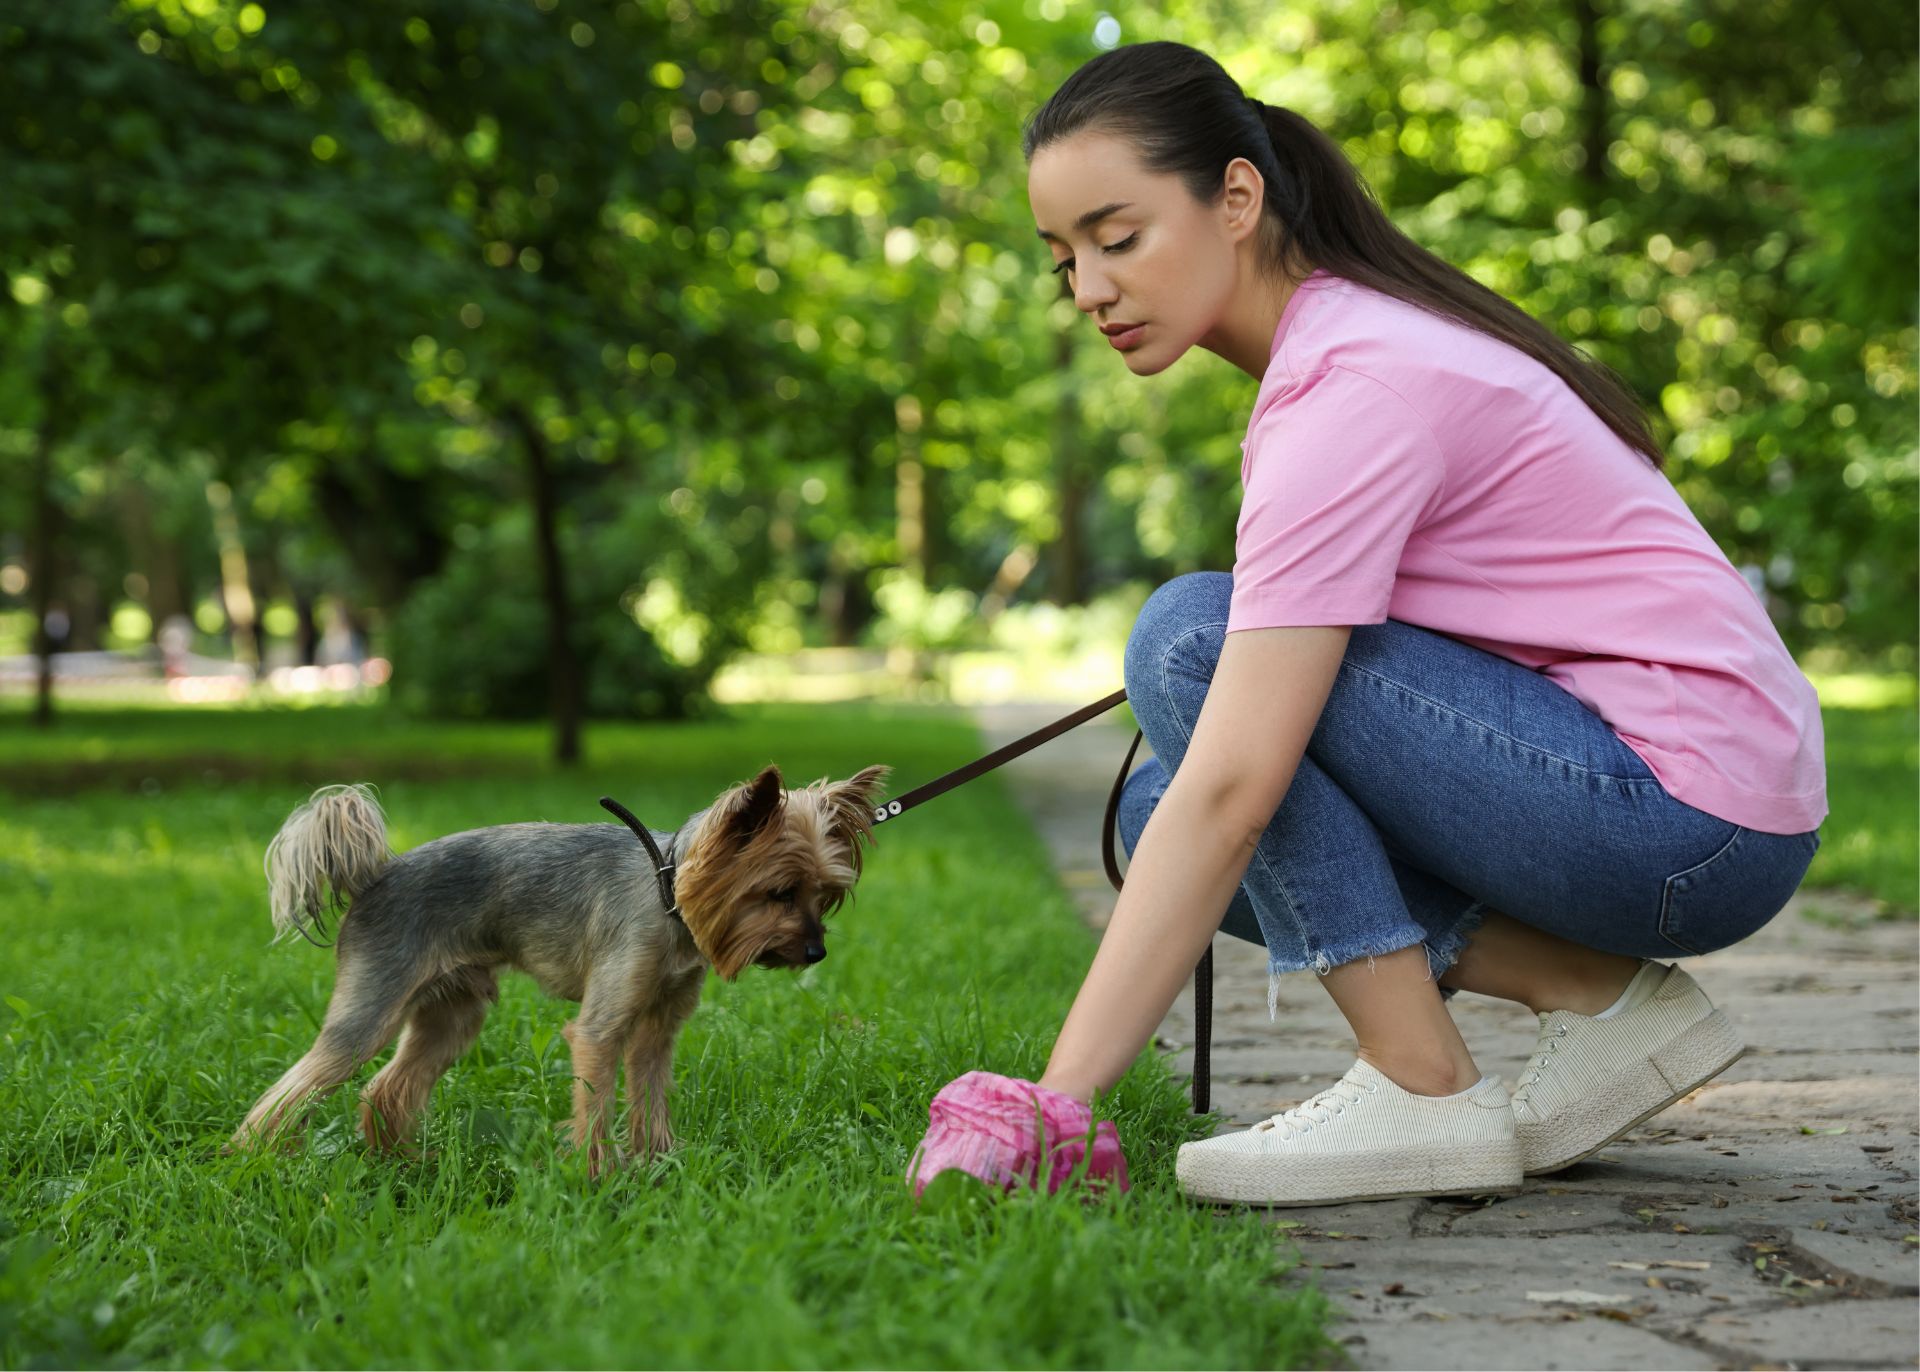 Woman at park with small terrier dog to illustrate dangers of opiate overdose